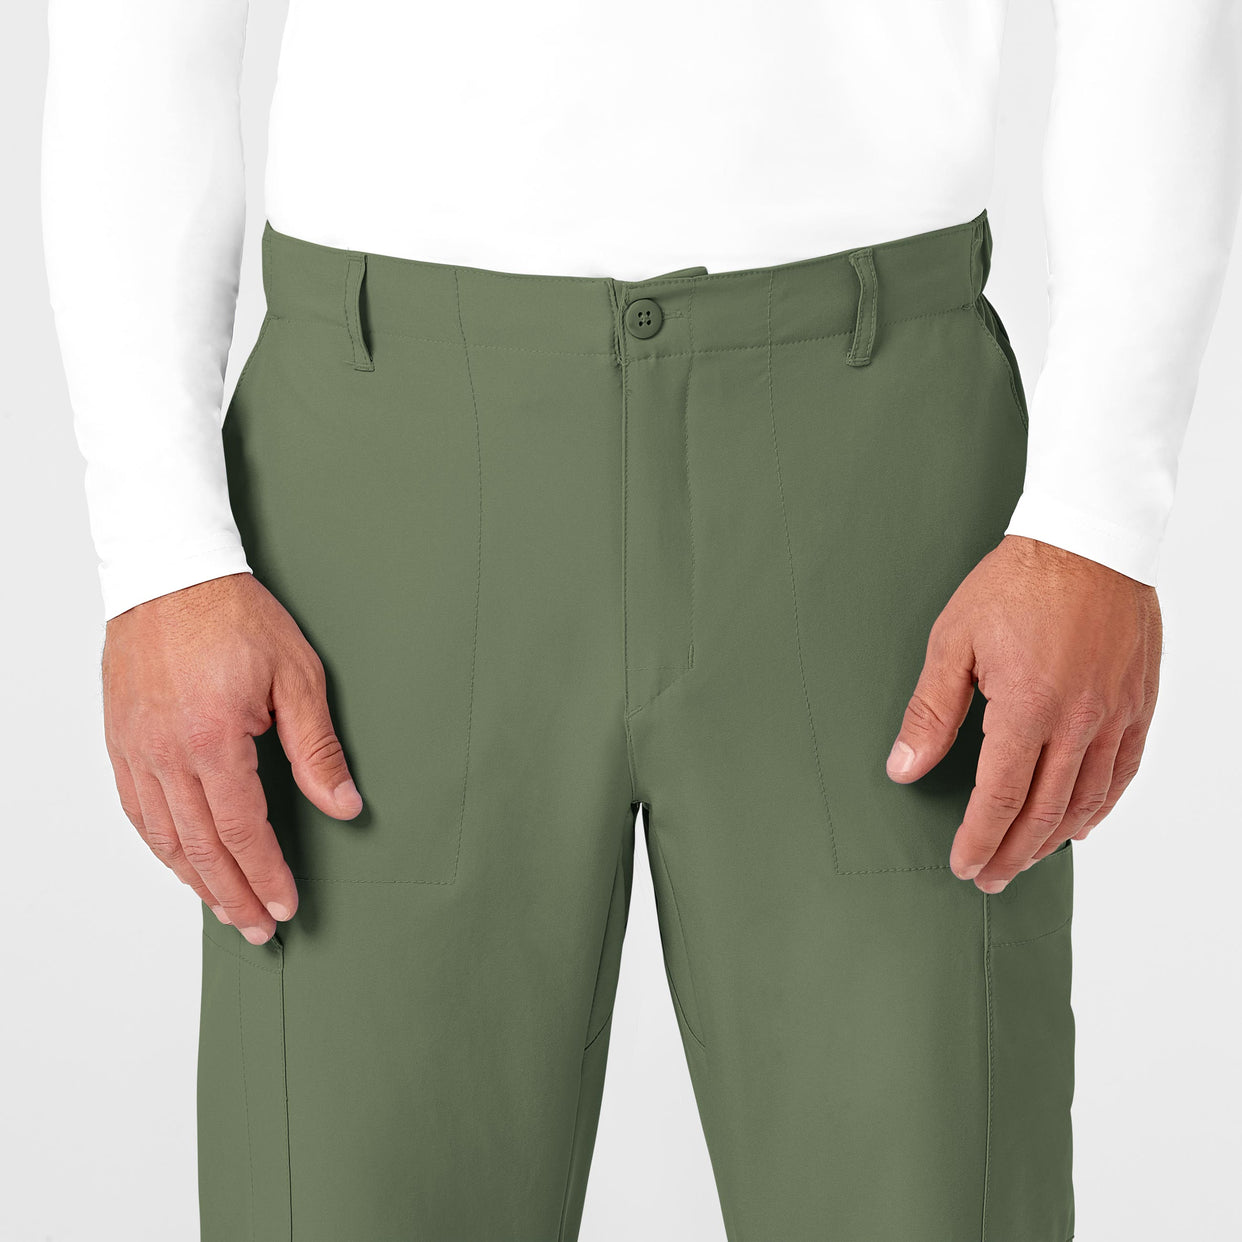 W123 Men's Flat Front Cargo Scrub Pant Olive front detail